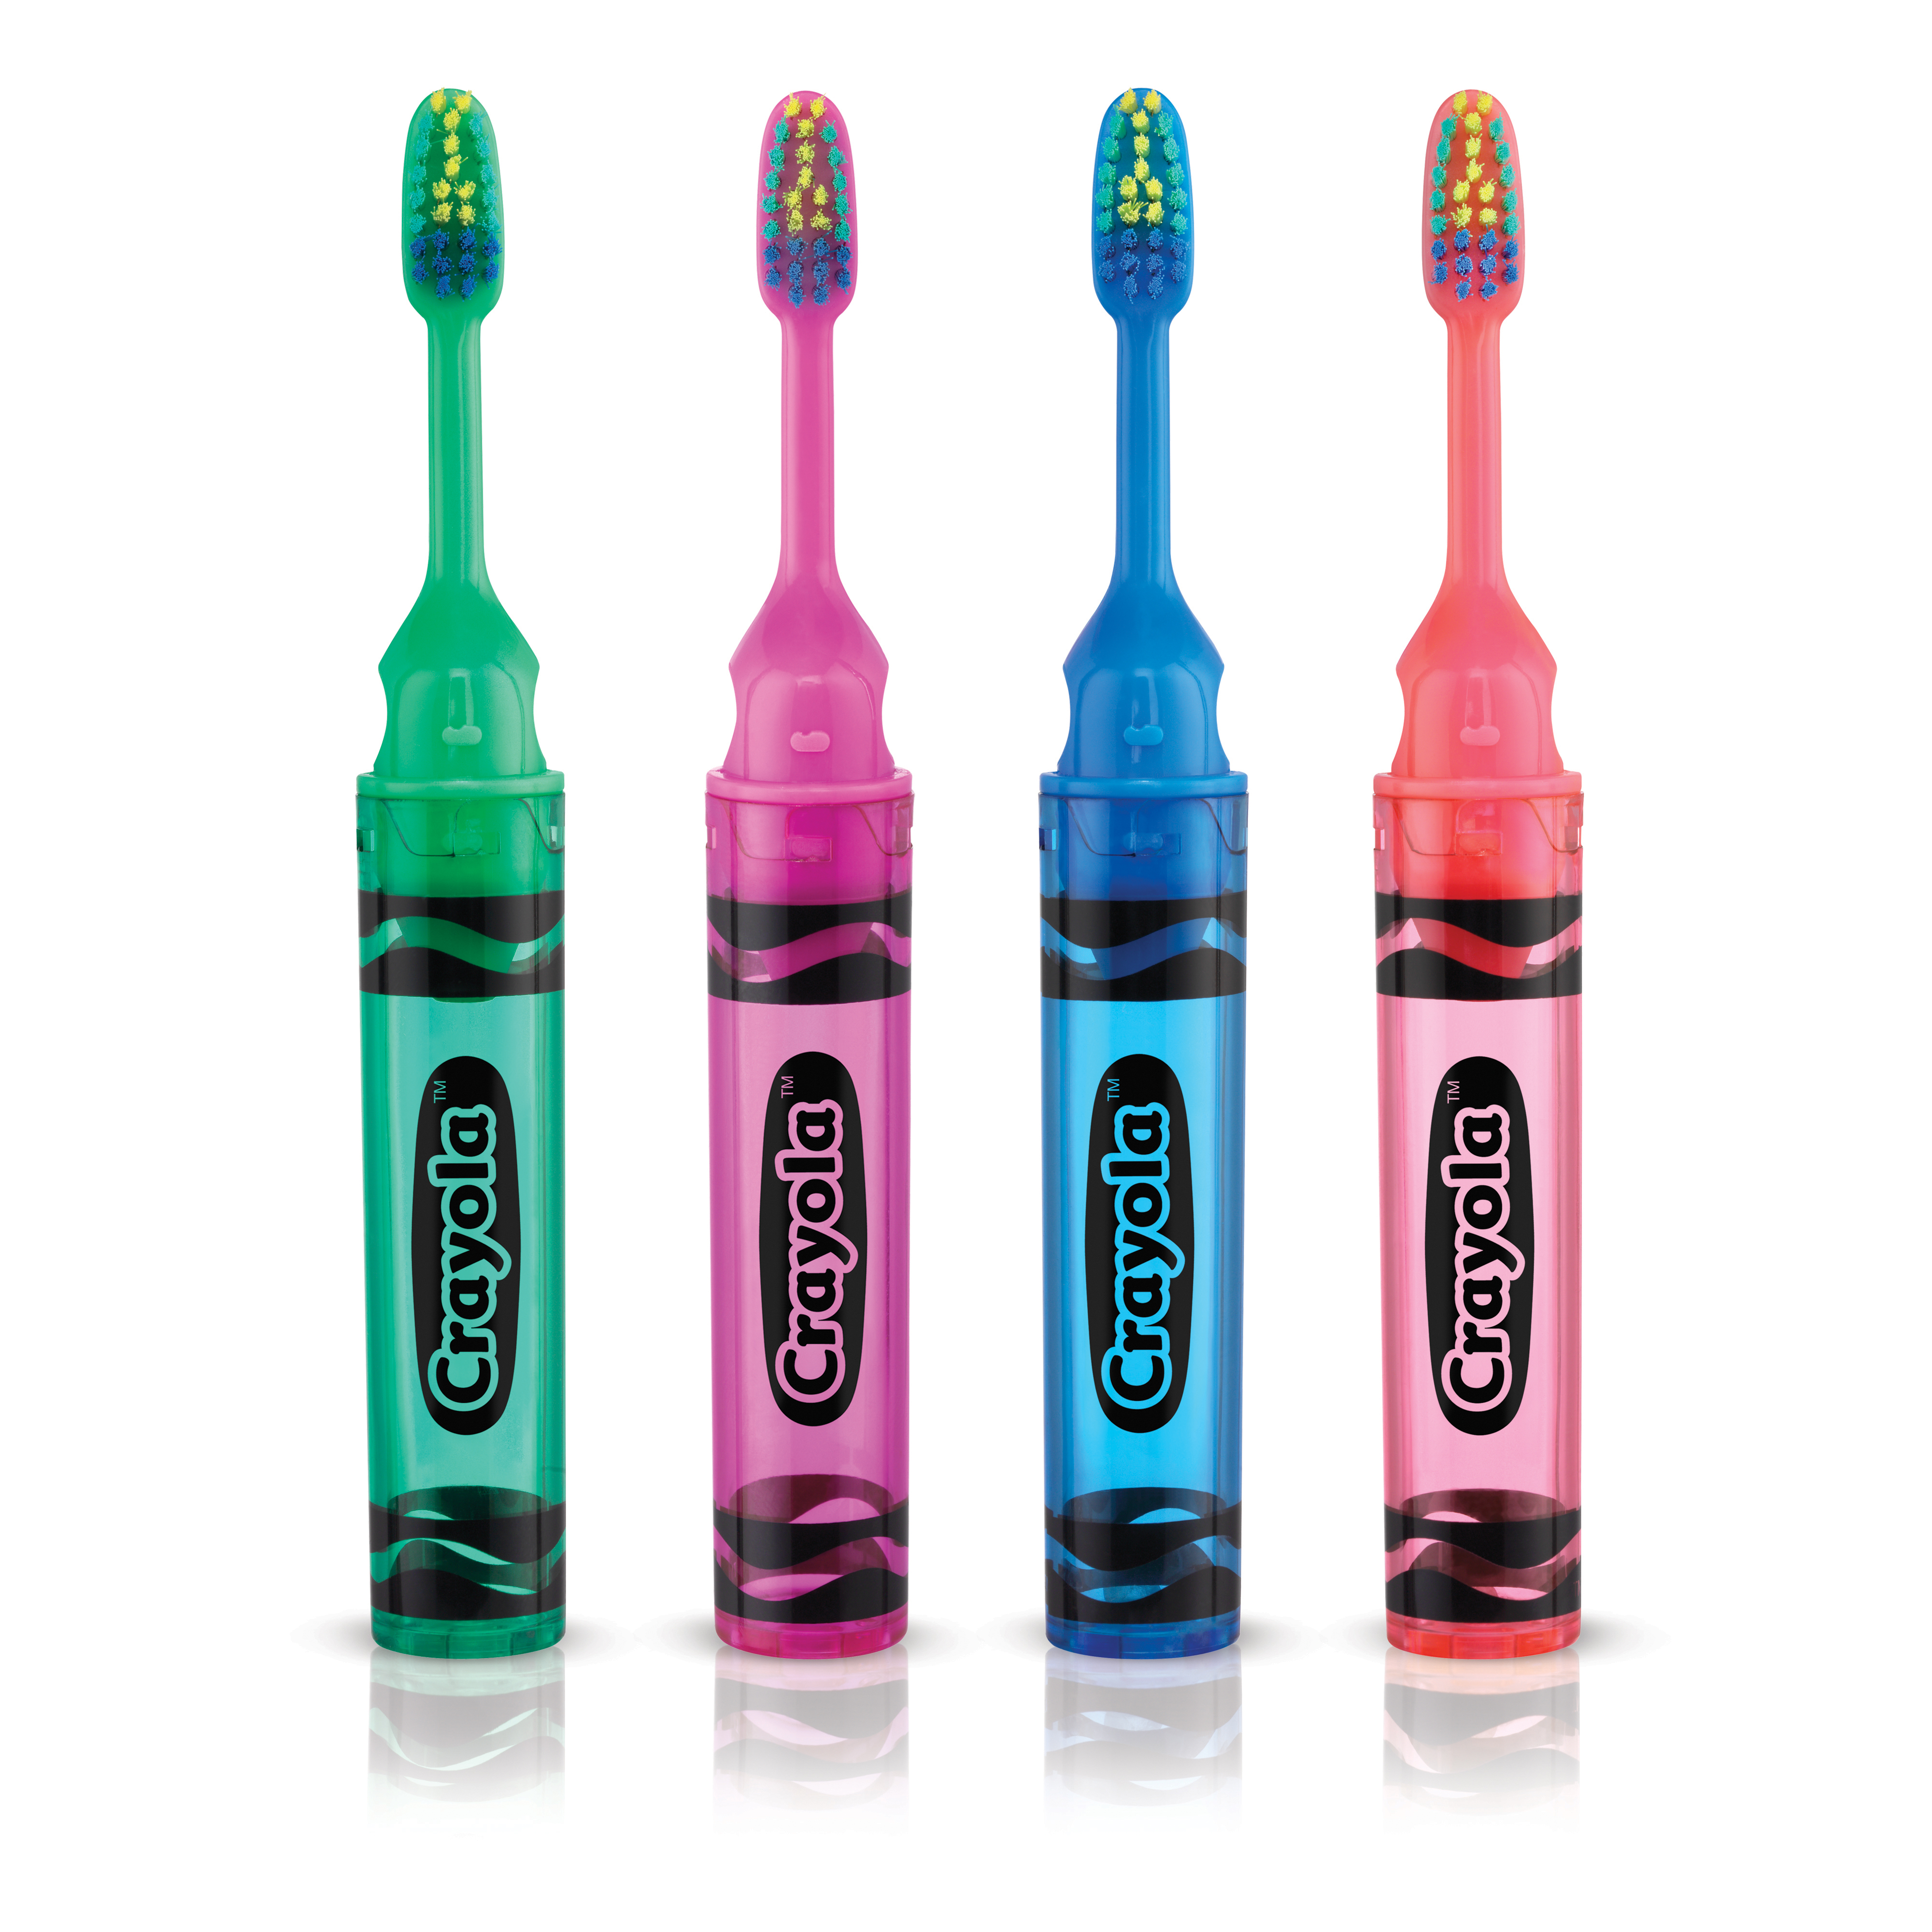 228-Product-Toothbrush-Manual-Crayola-Travel-naked-4colors.jpg